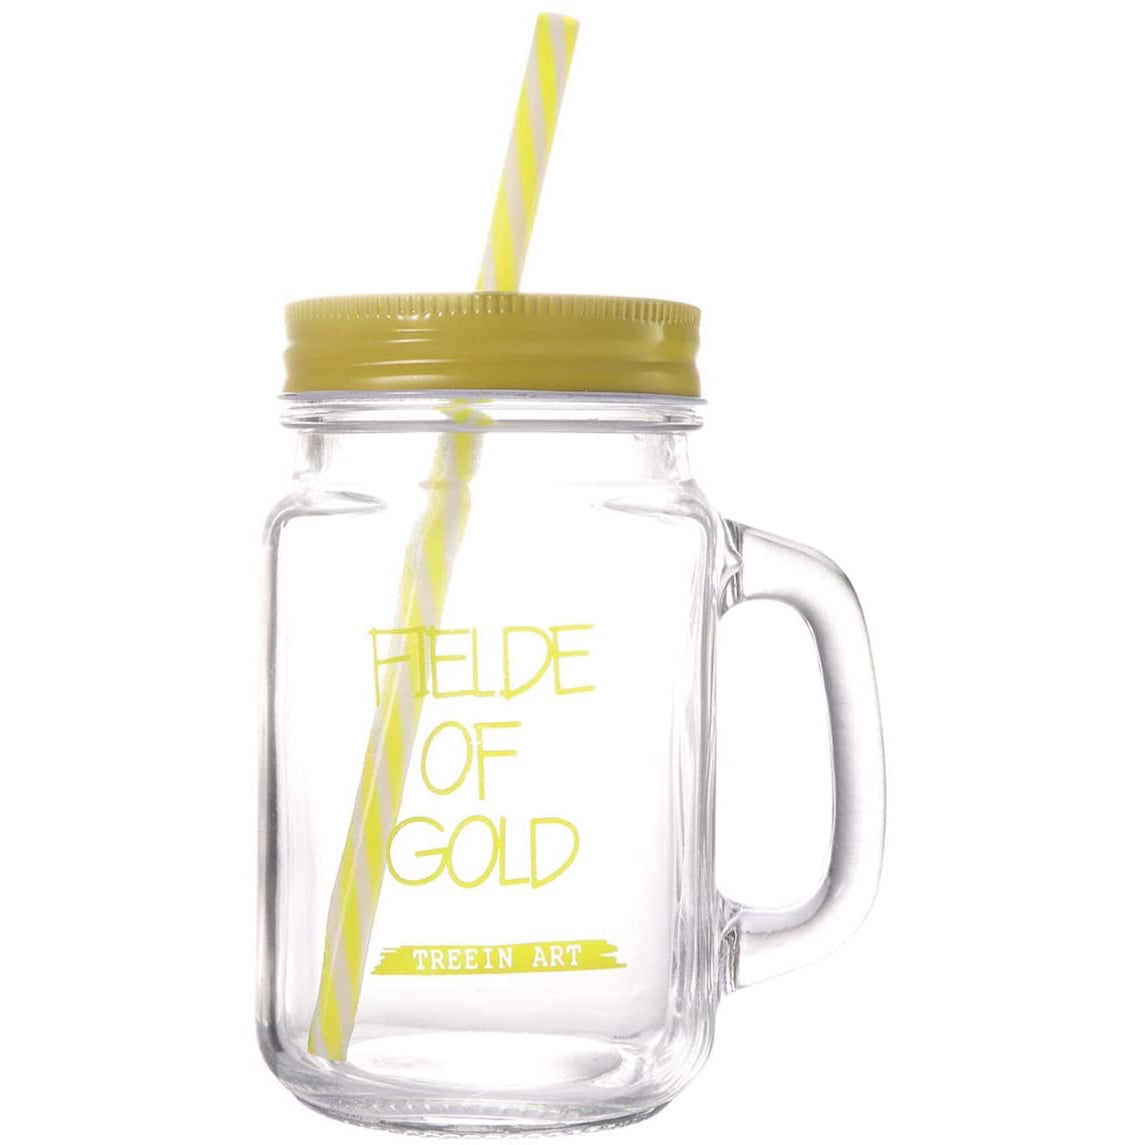 Ideal For Enjoying Your favourite Cold Beverage Ideal for Traditional Lemonade CKB Ltd® Set of 4 Traditional American Old Style Mason Pint Jar Drinking Glasses With Sturdy Handle Screw Cap Lid & Straw Iced Tea old Ale 